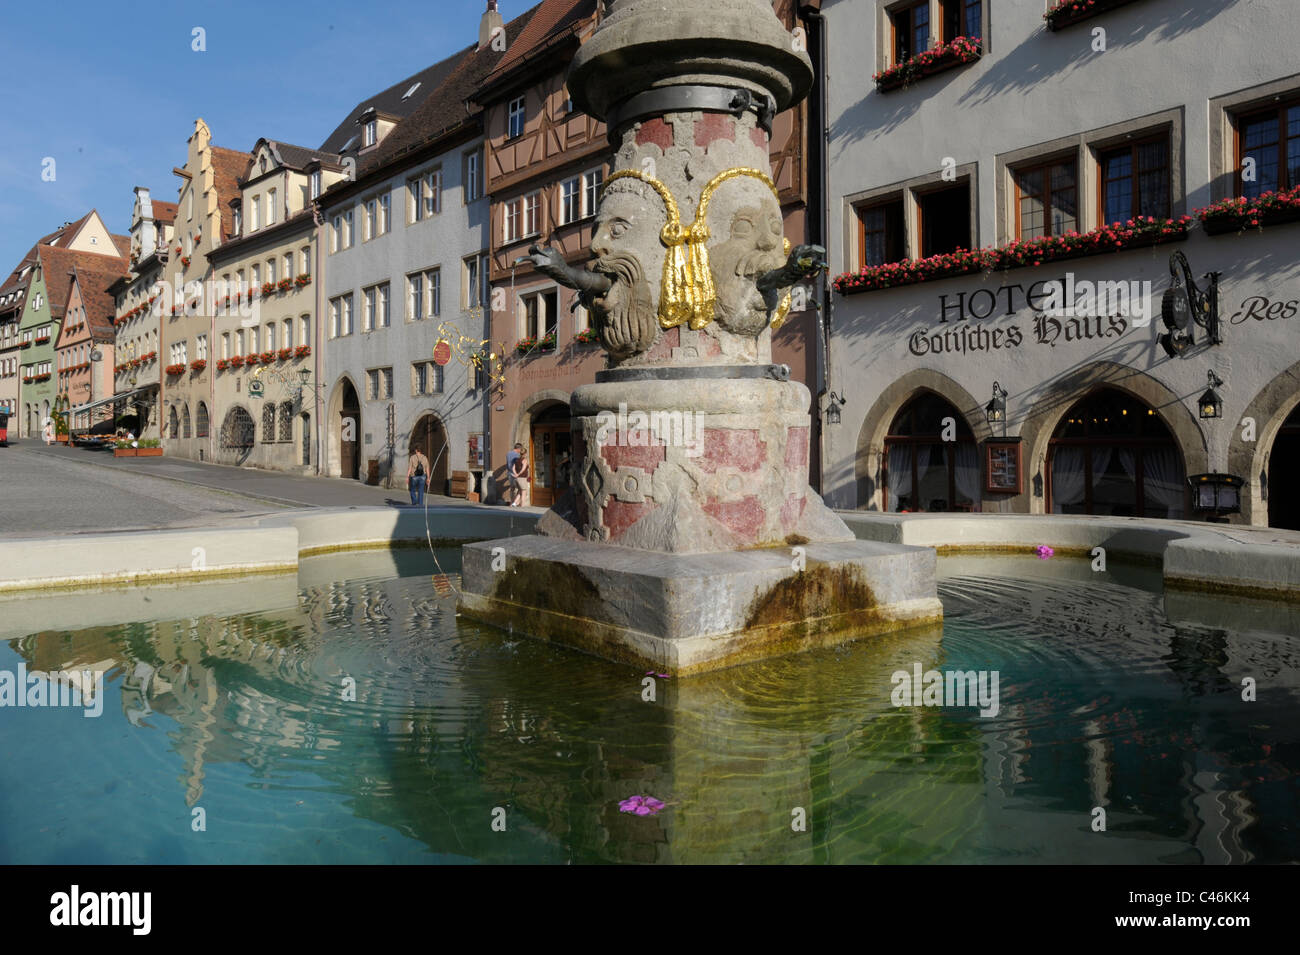 waterspout fountain on market place of city Rothenburg ob der Tauber in Bavaria, Germany Stock Photo